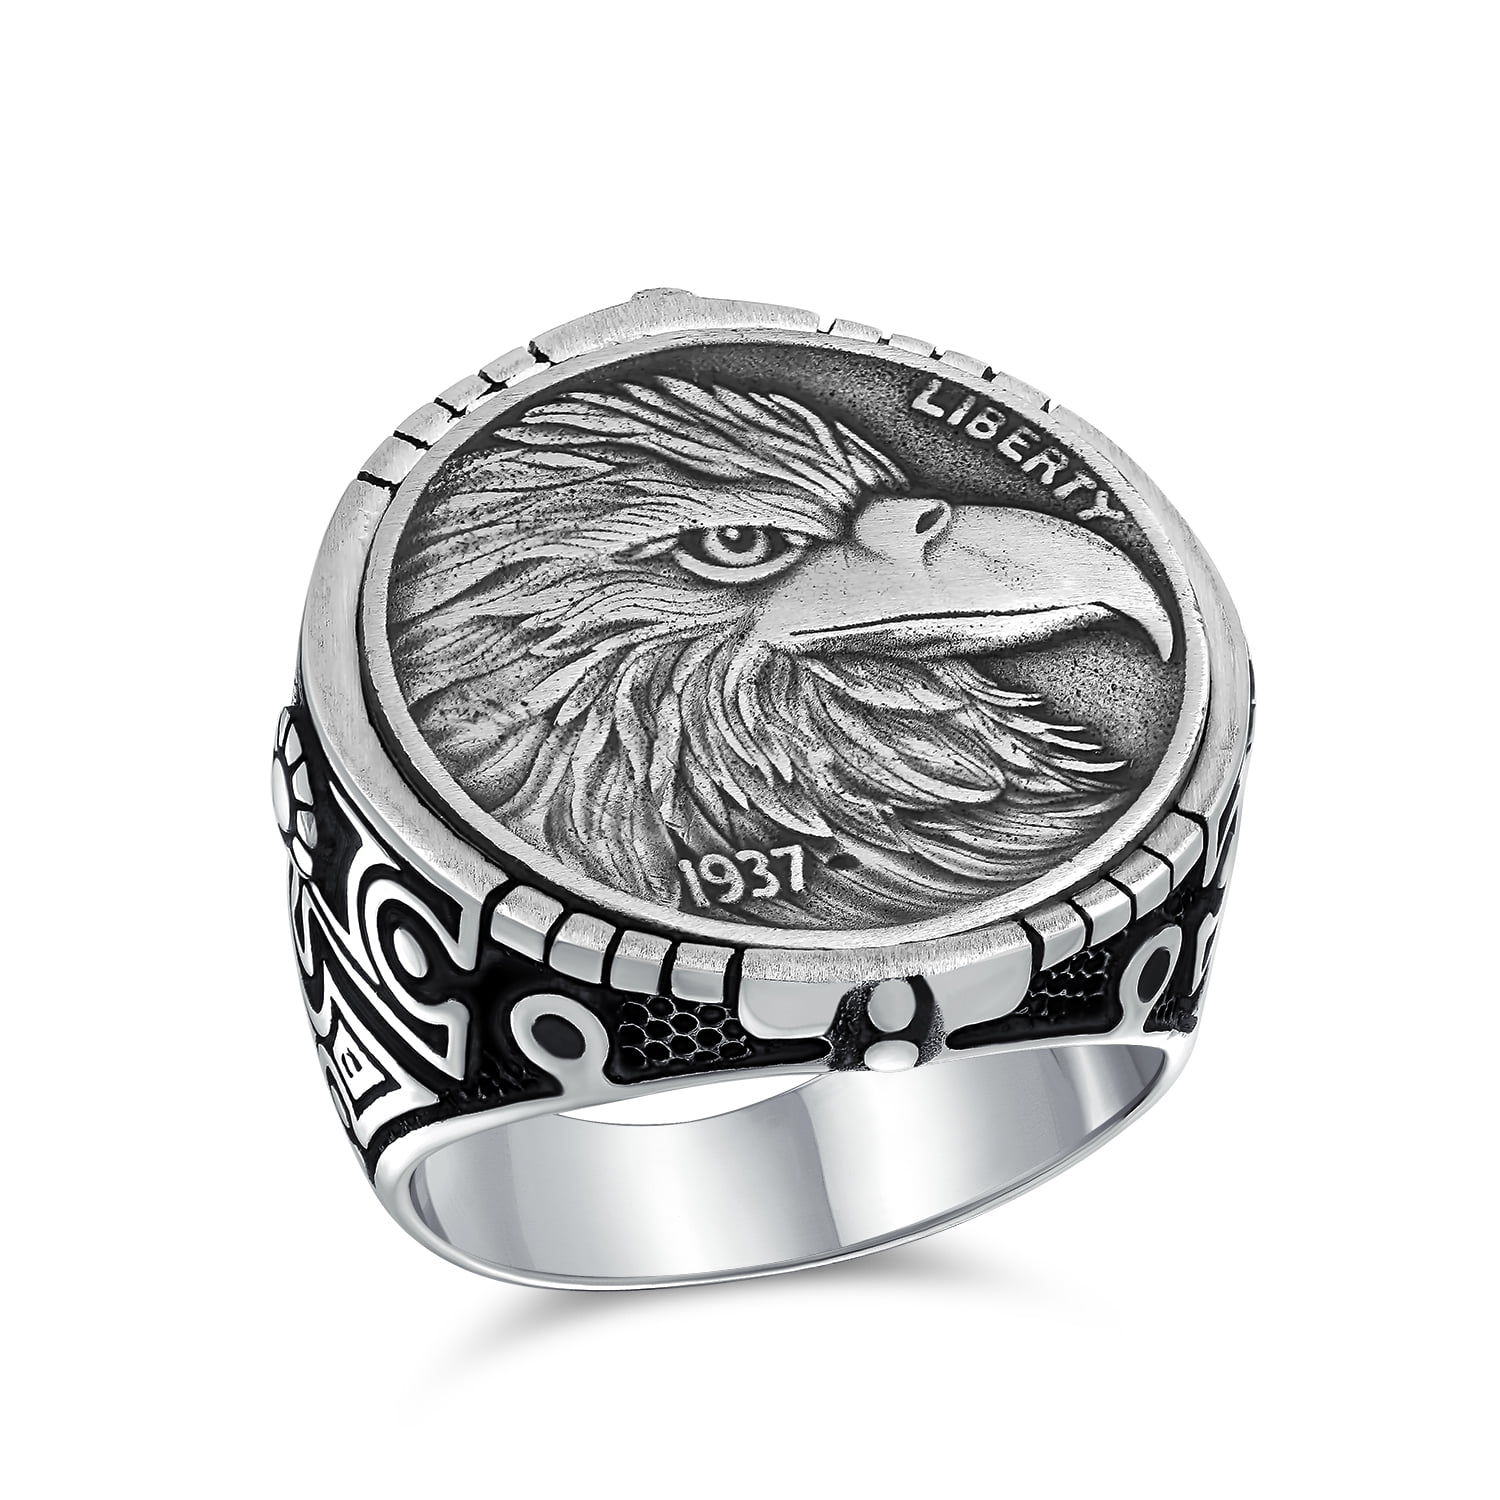 Solid 925 Sterling Silver Statement Eagle Head Liberty 1937 Coin Style Patriotic USA Bird American Symbol Novelty Ring For men 